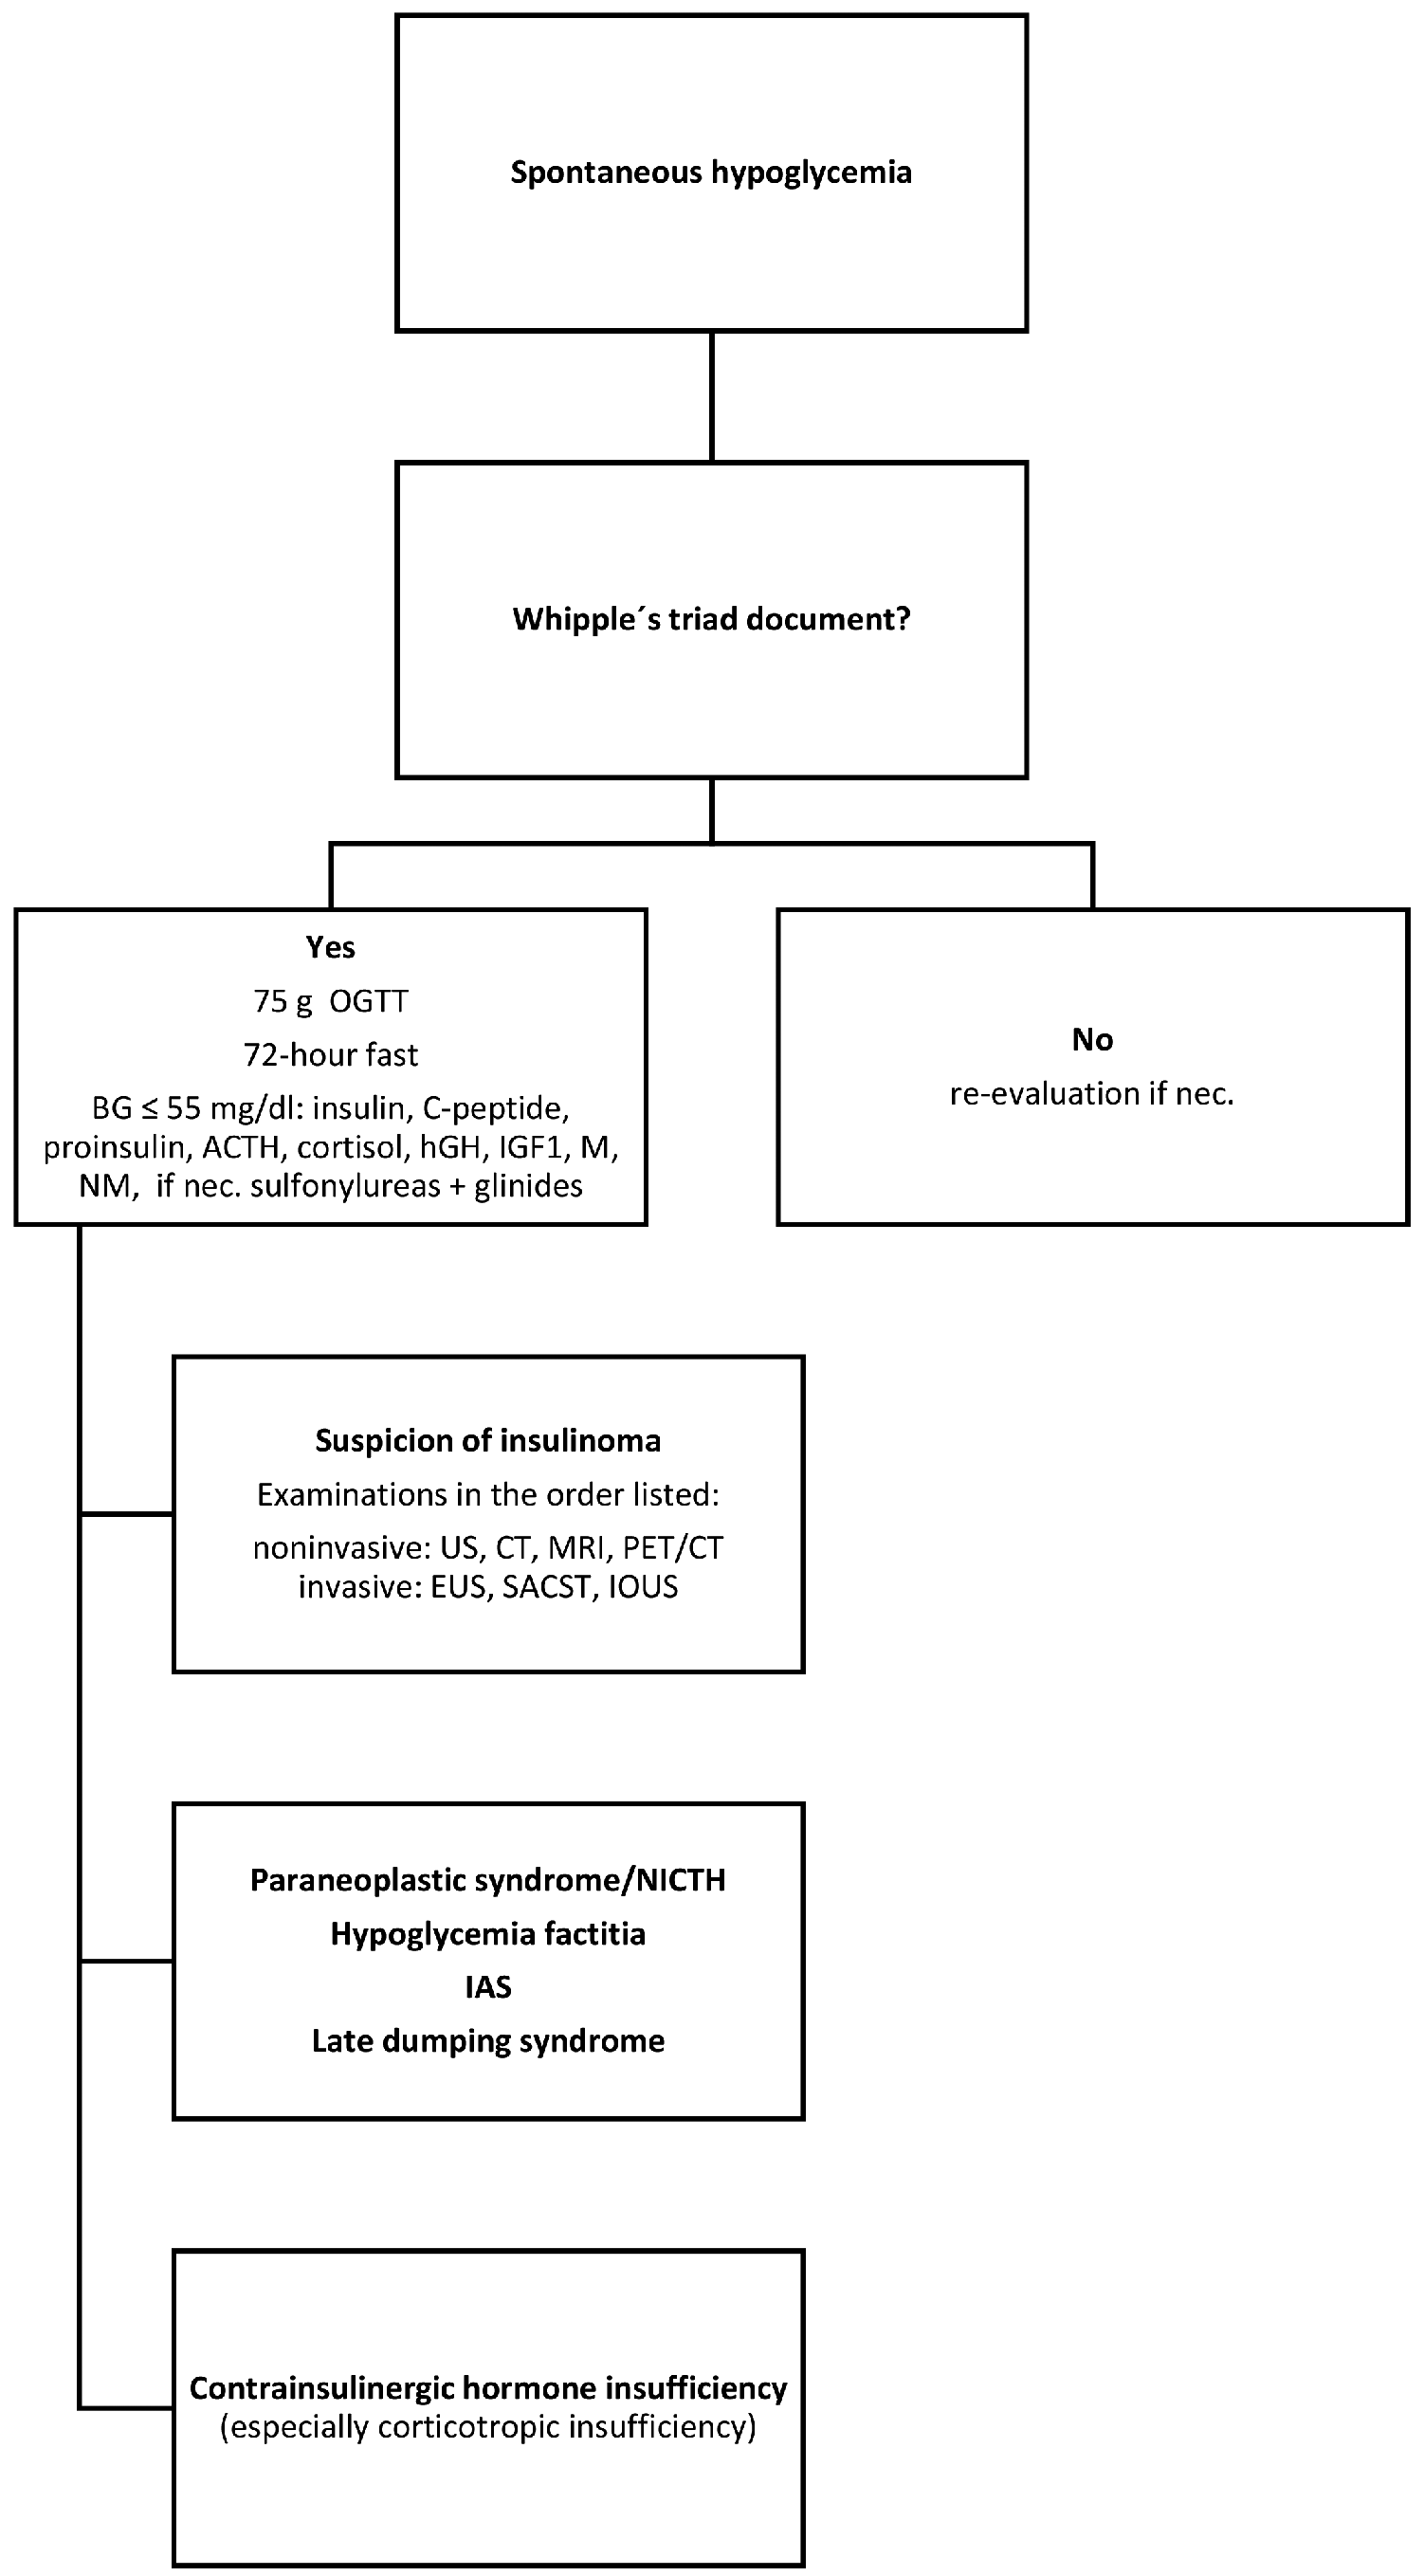 Spontaneous hypoglycemia: should we mind the gap? Long-term follow-up of healthy people who met Whipple’s triad criteria